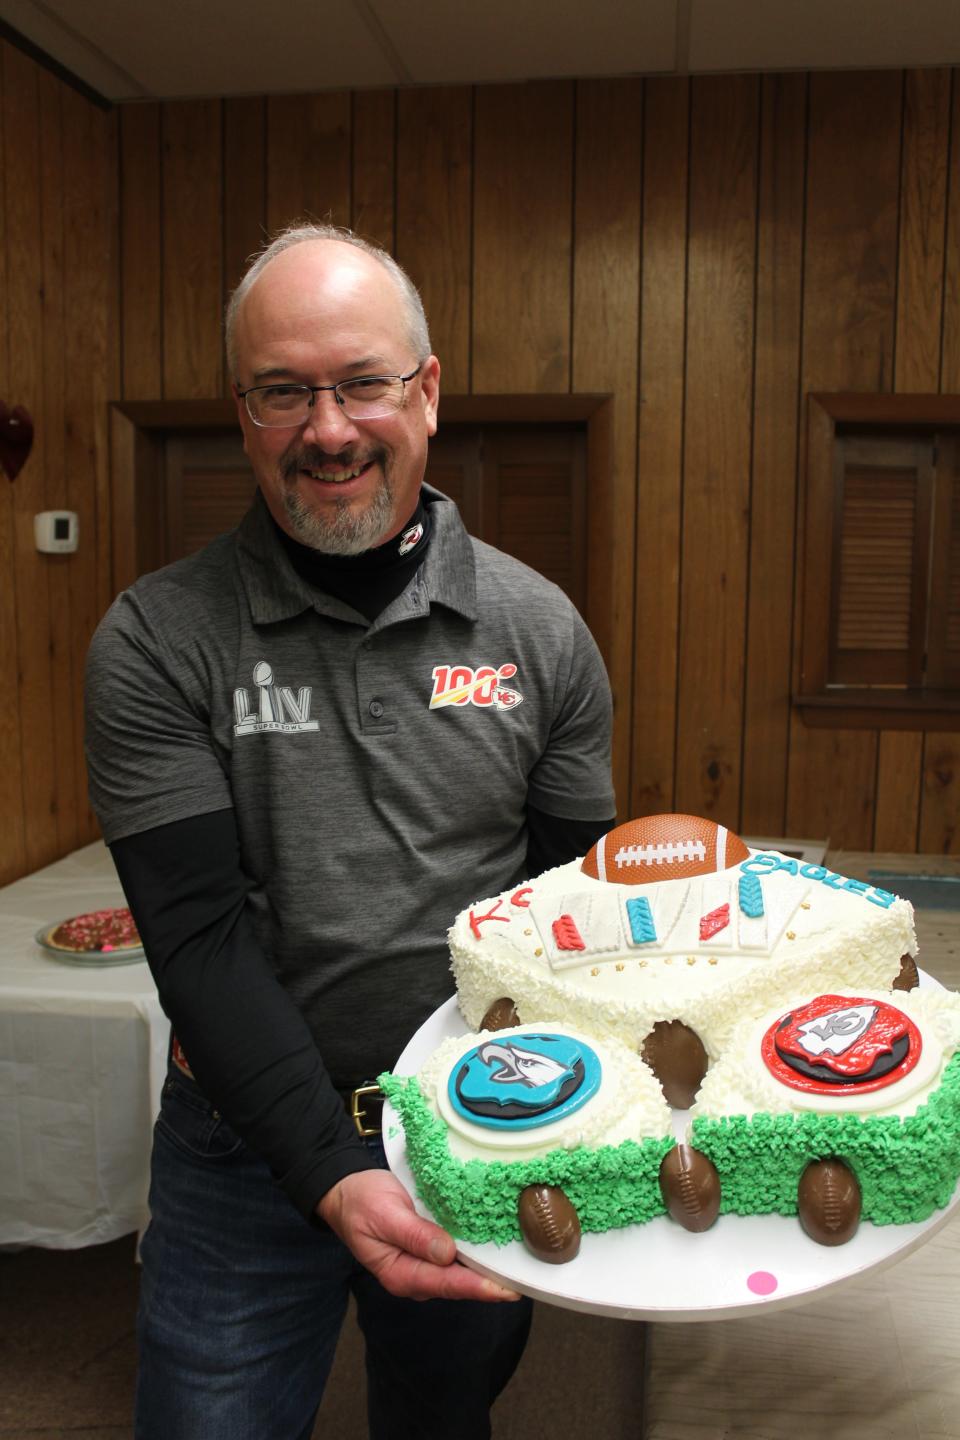 Mark Albright of Meyersdale purchased a Super Bowl cake for $120 made for the Death By Chocolate event in Meyersdale on Friday evening. Albright has been a lifelong Chiefs fan and knew he couldn't pass up the creation made by Helen Smith of Somerset.